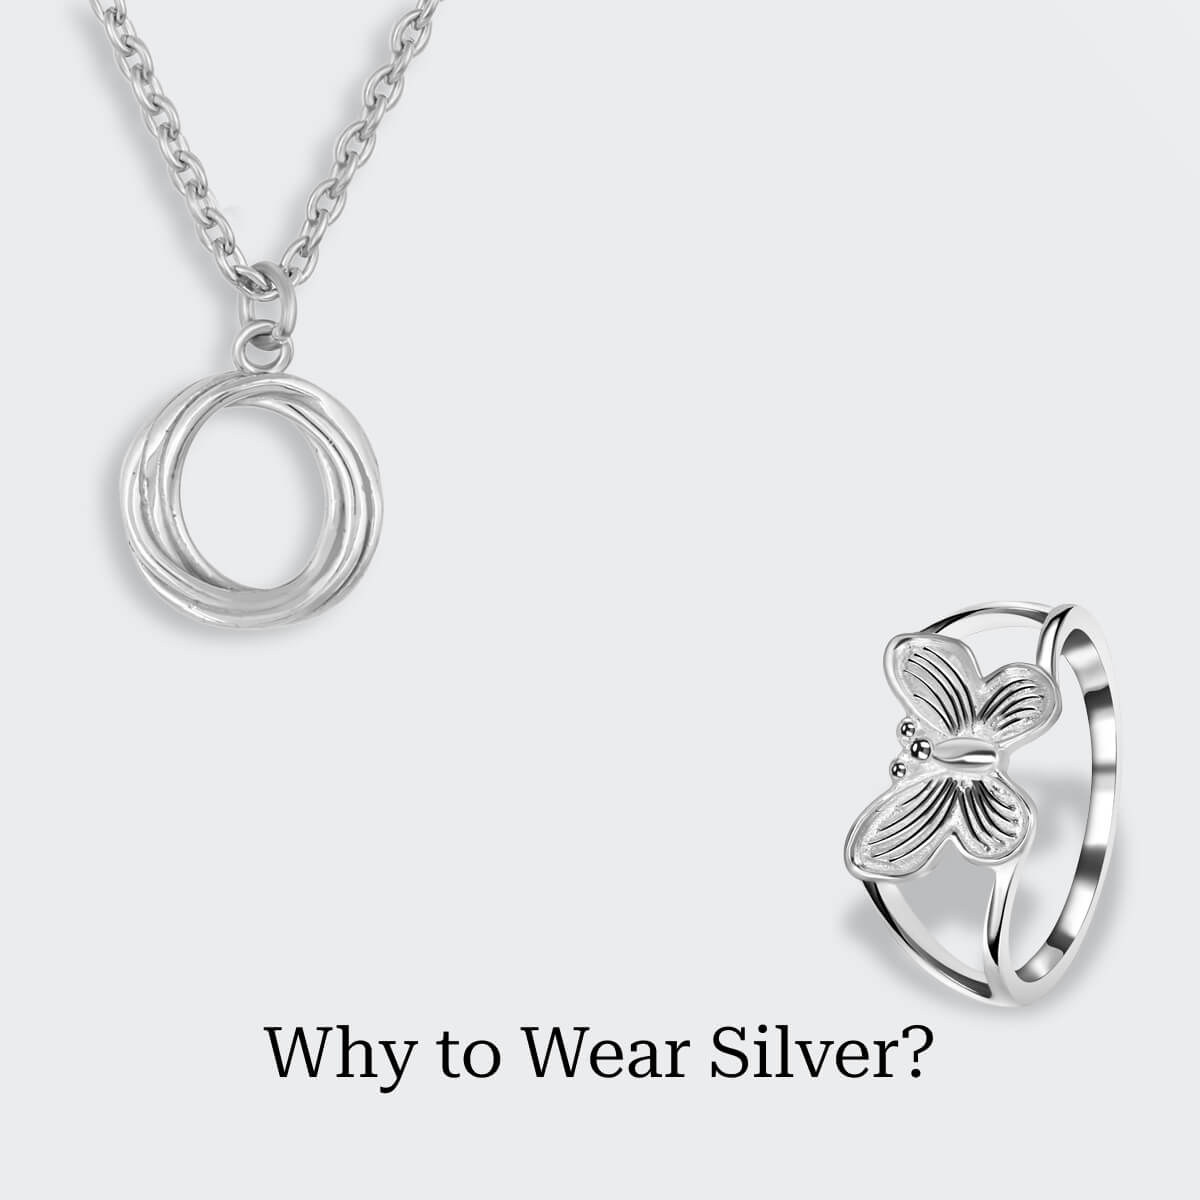 Benefits of Wearing Silver